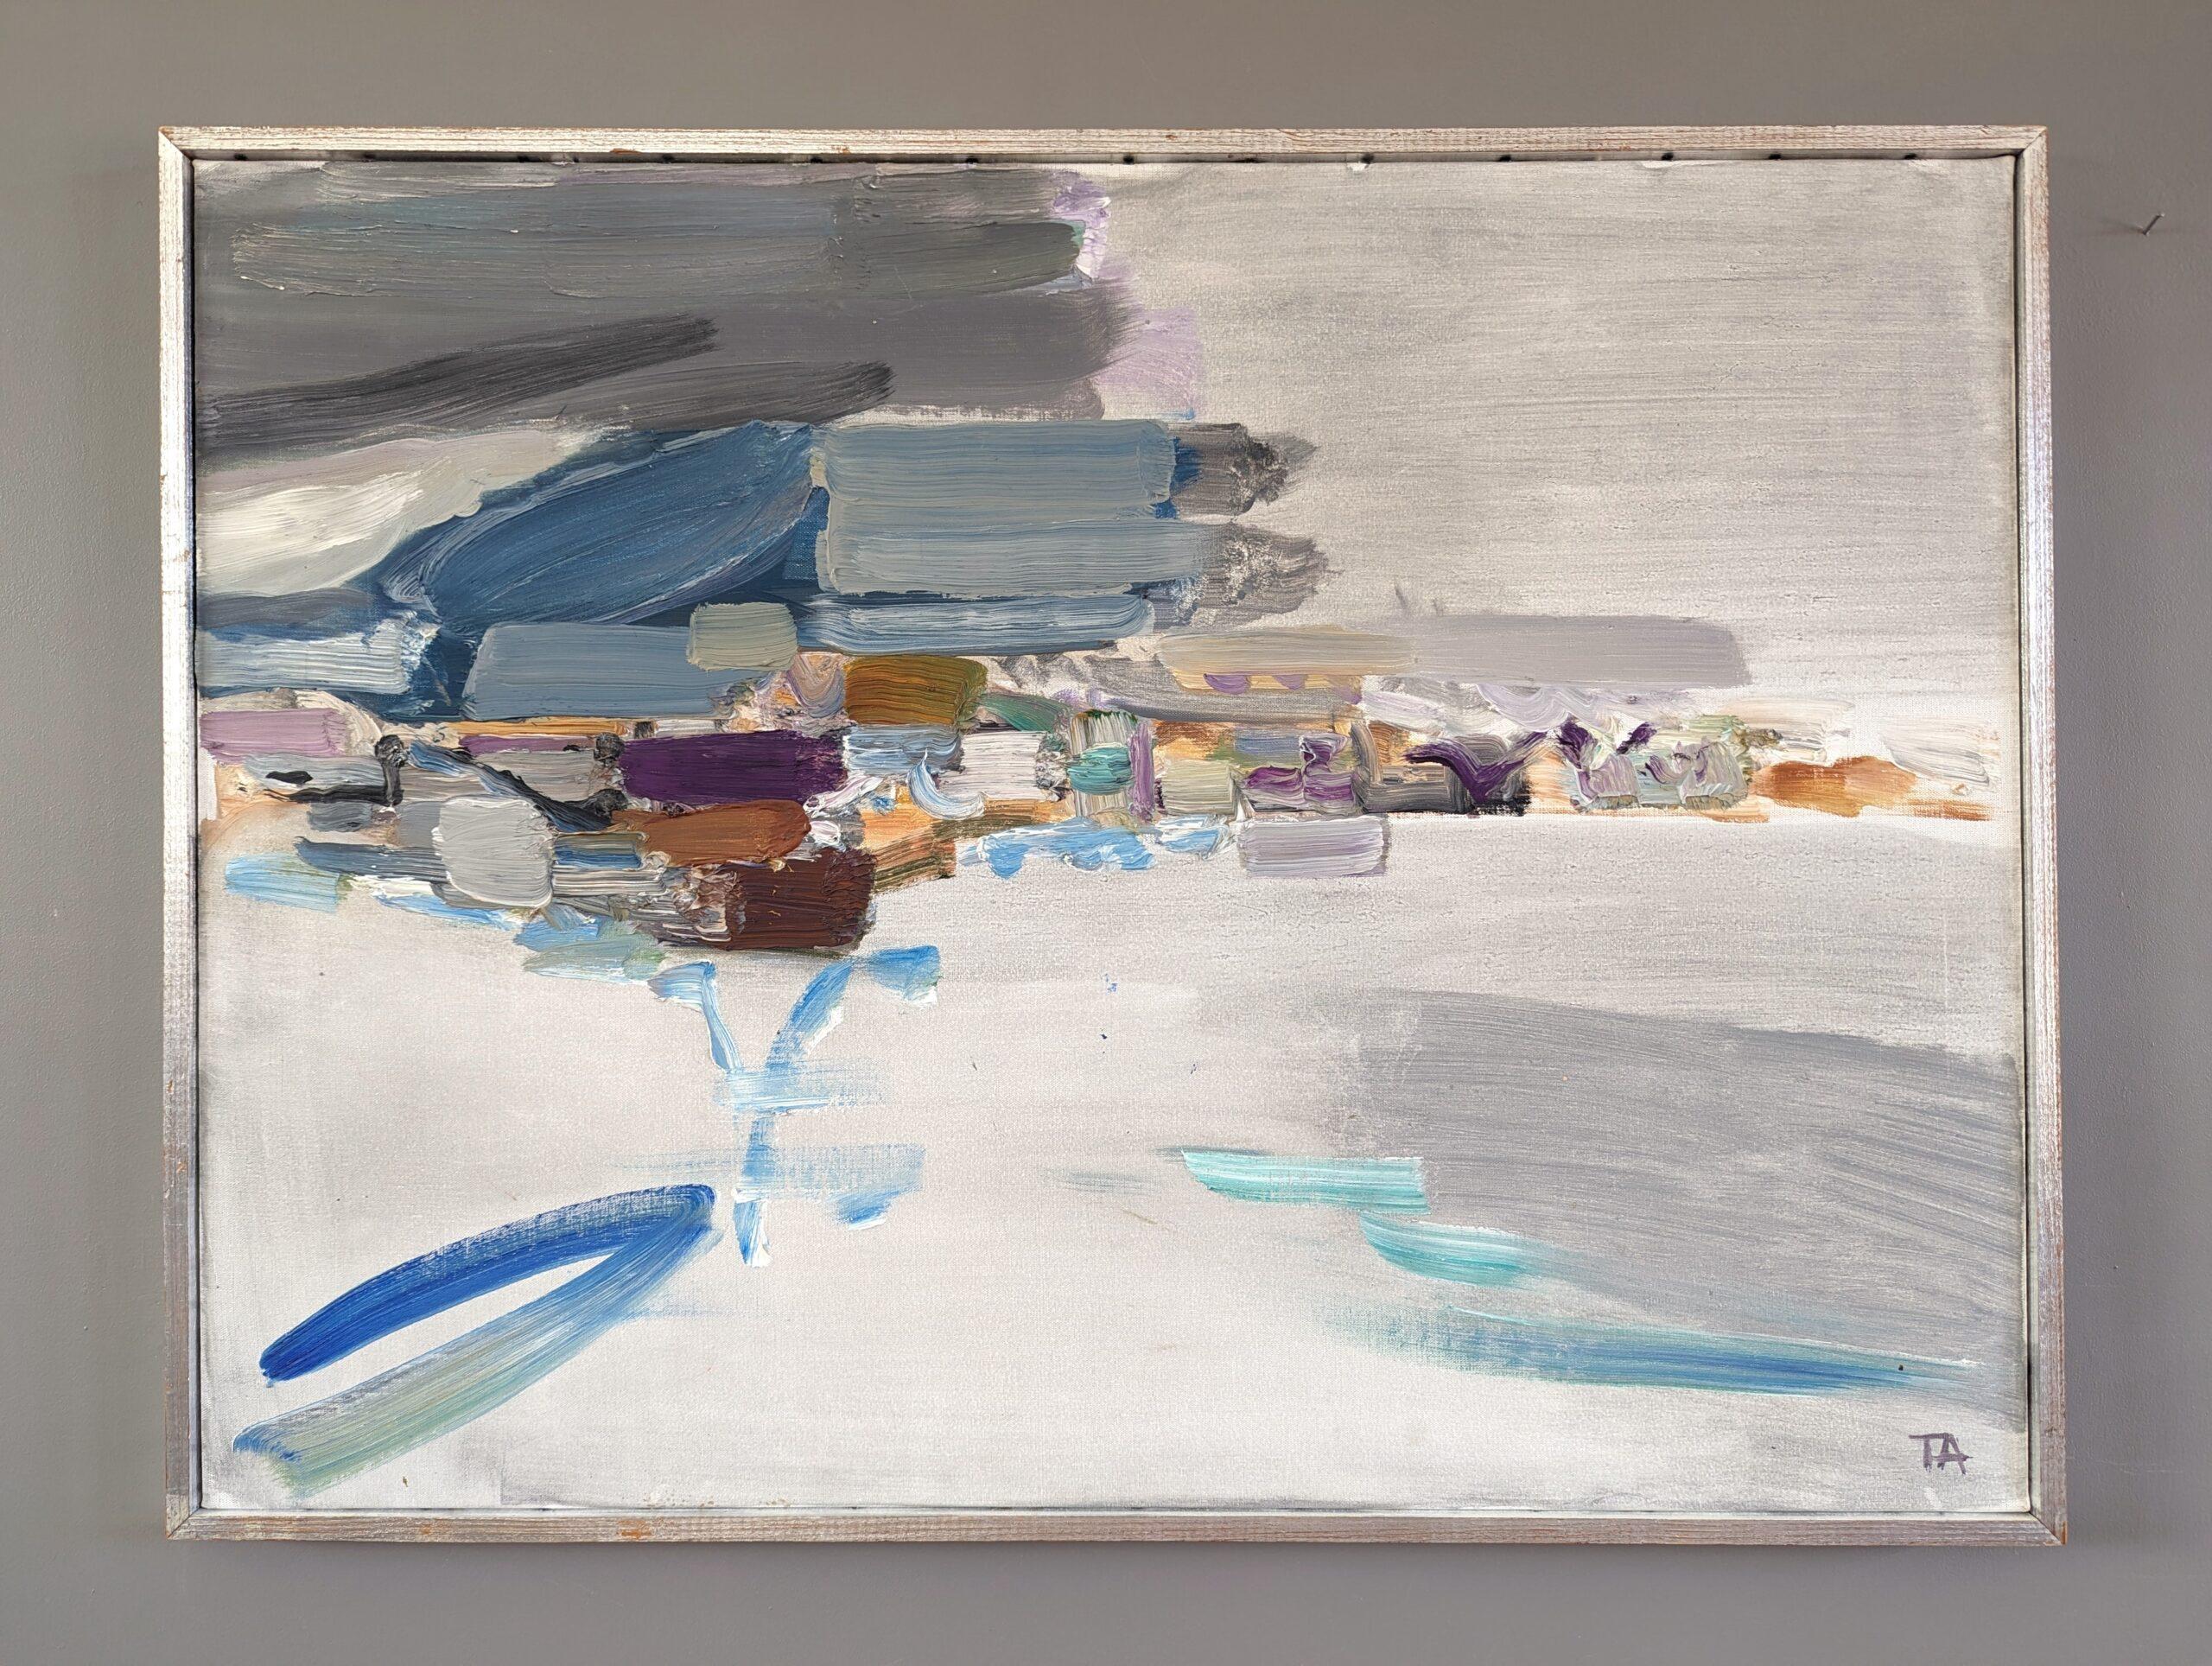 COASTAL THUNDERSTORM
Size: 52.5 x 70 cm (including frame)
Oil on Canvas

An emotive and wonderfully executed mid-century abstract artwork, painted in oil onto canvas and dated 1963.

Captured through dynamic brushwork and a bold abstraction of form,